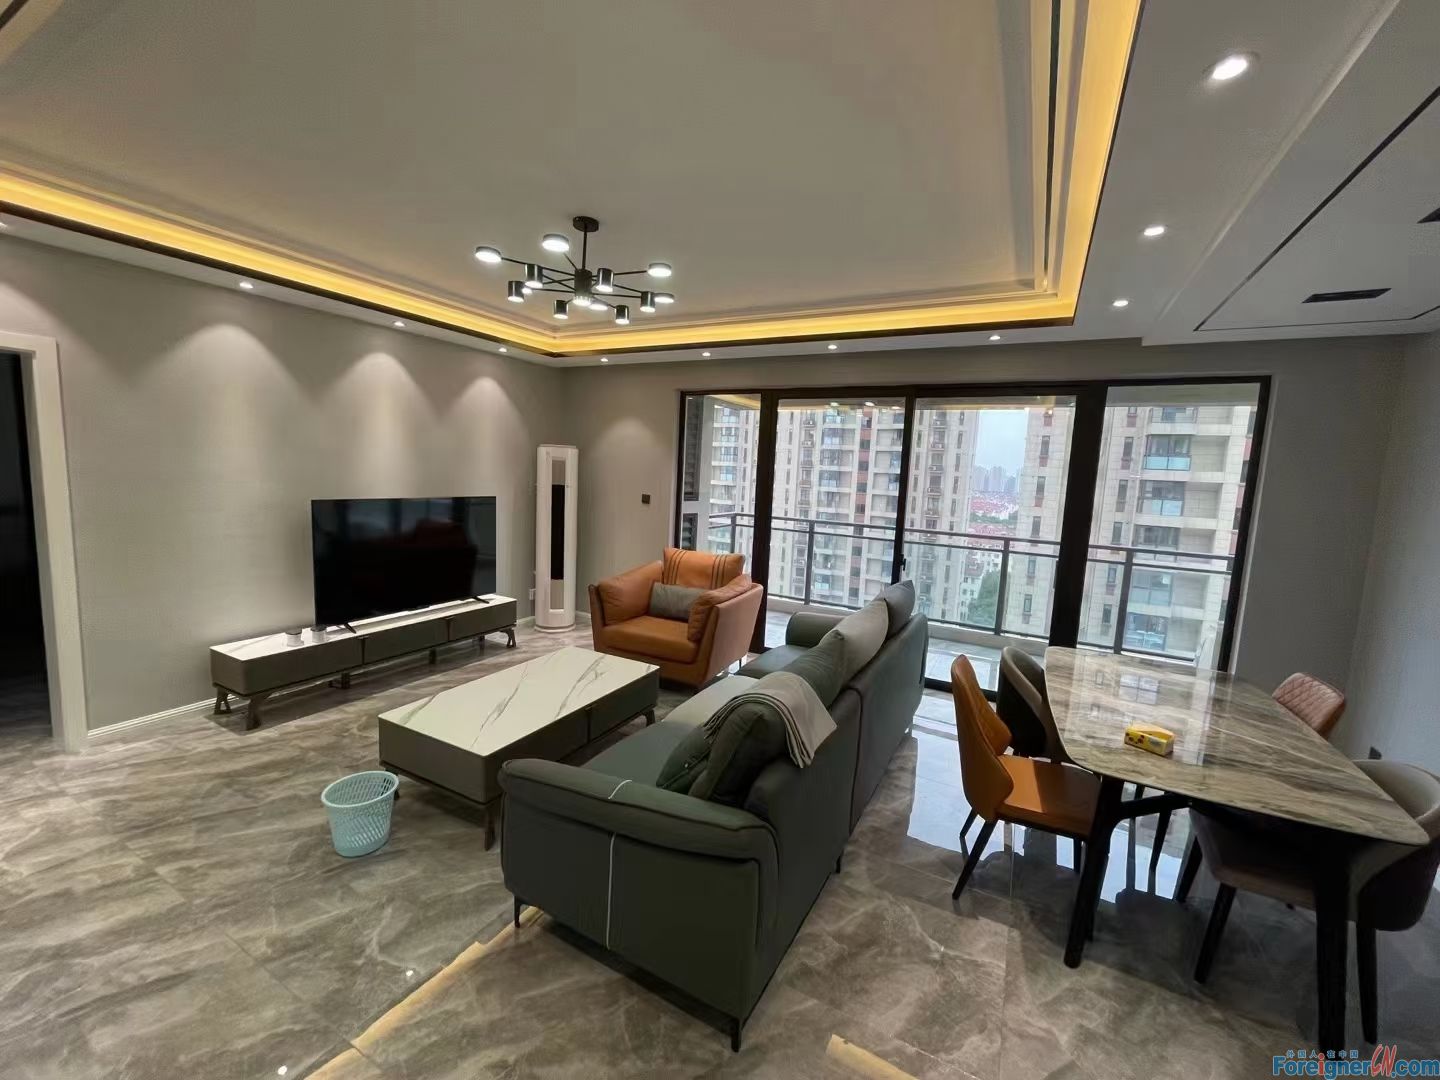 Stunning！！！ Nice apartment rent in Suzhou,SIP/ Spacious and bright rooms,central AC/Subway line below/close to internatioanl schools SSIS, Dulwish, and OCAC